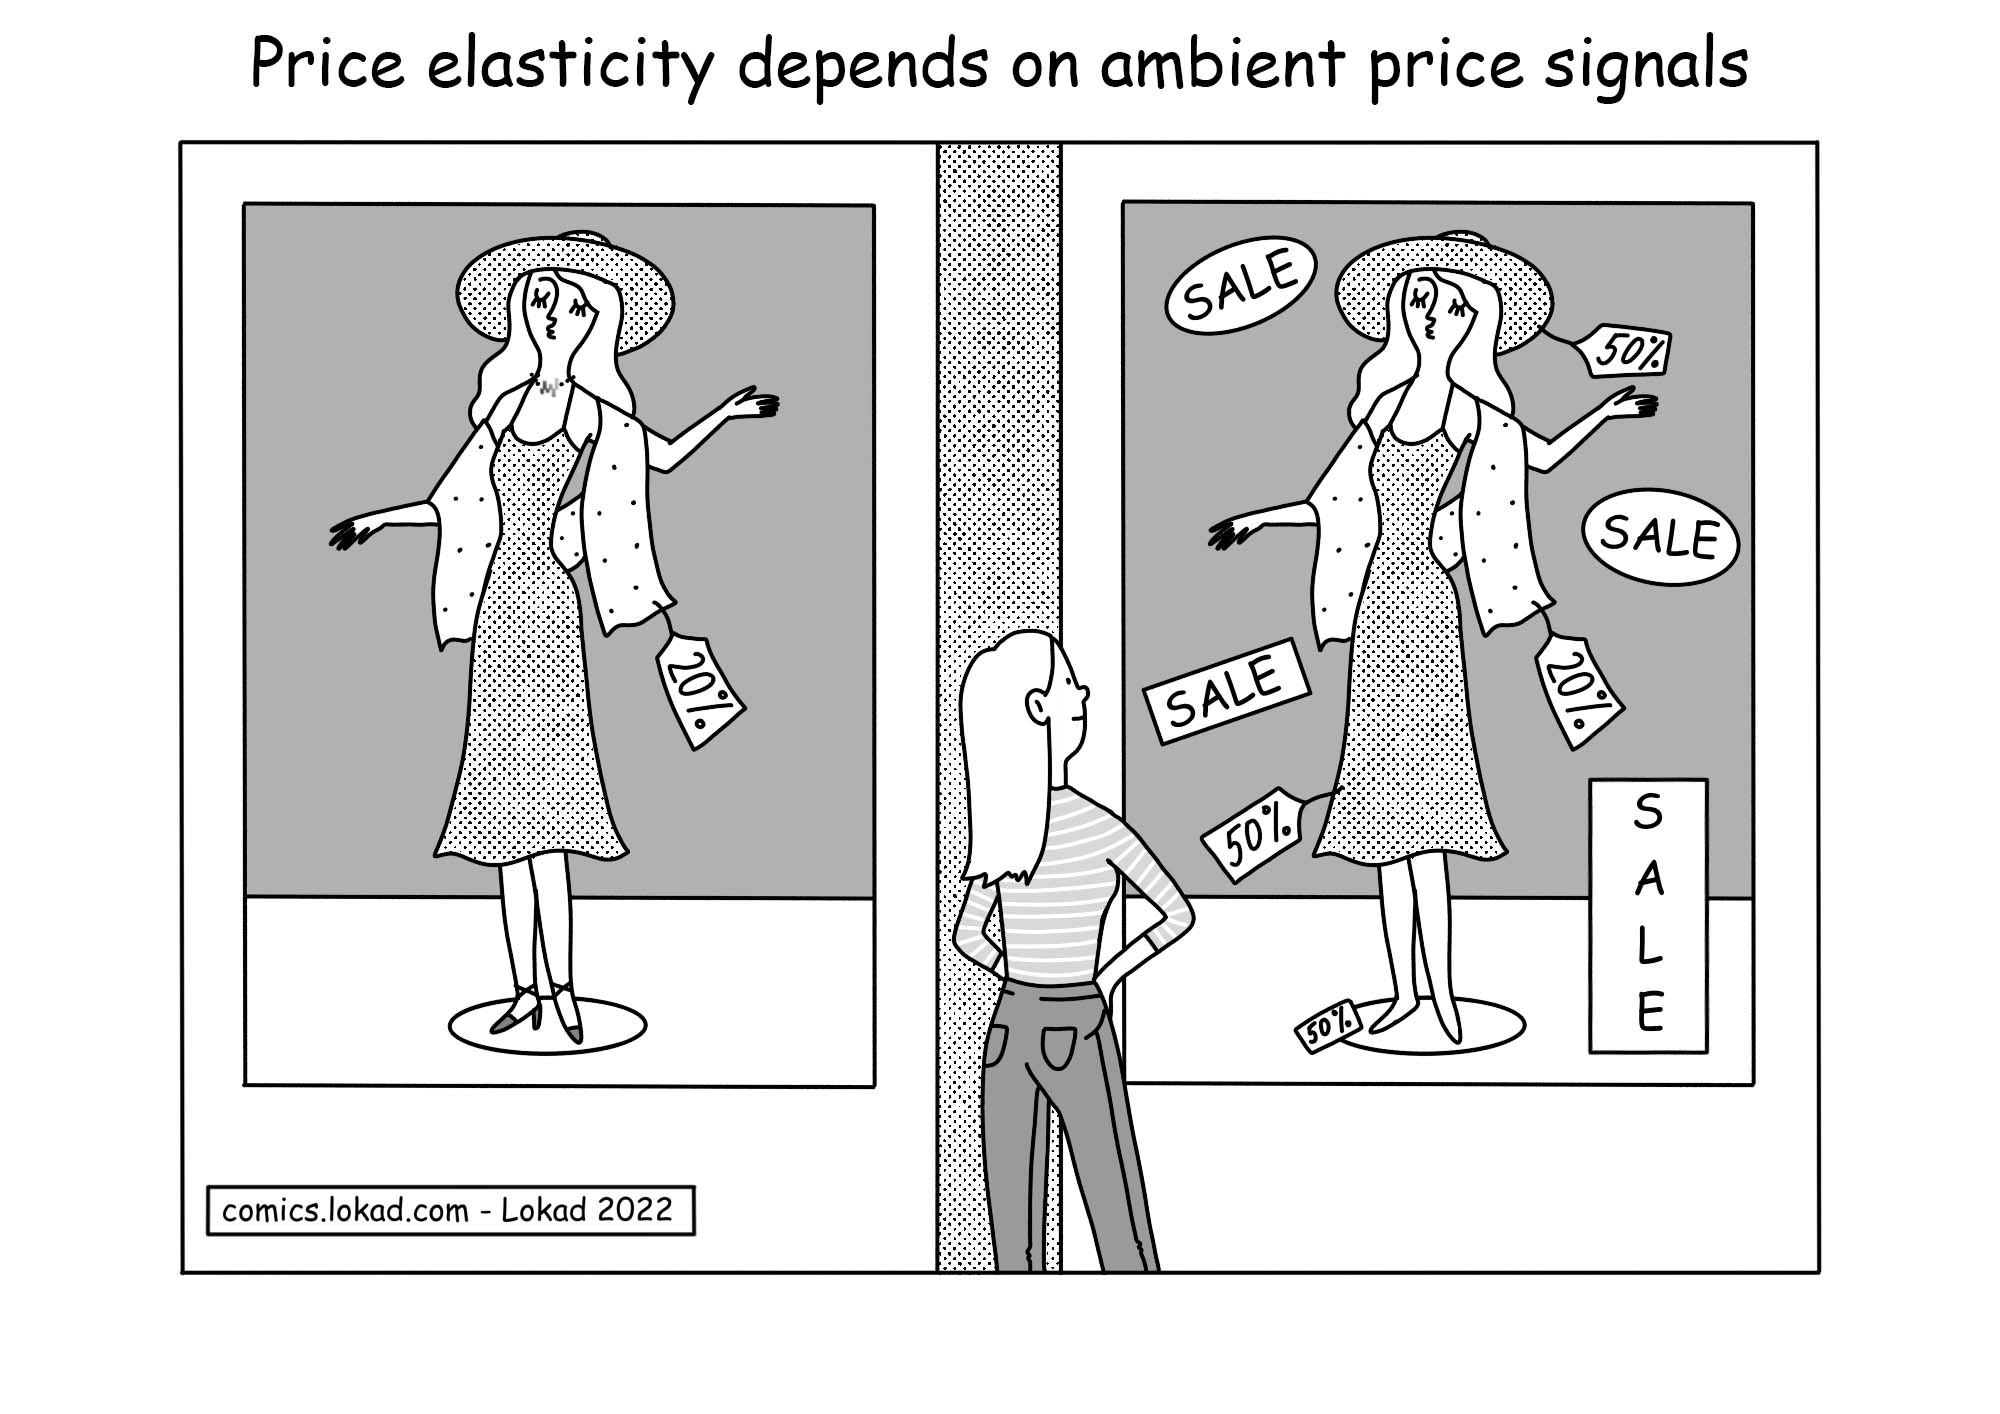 Price elasticity depends on ambient price signals